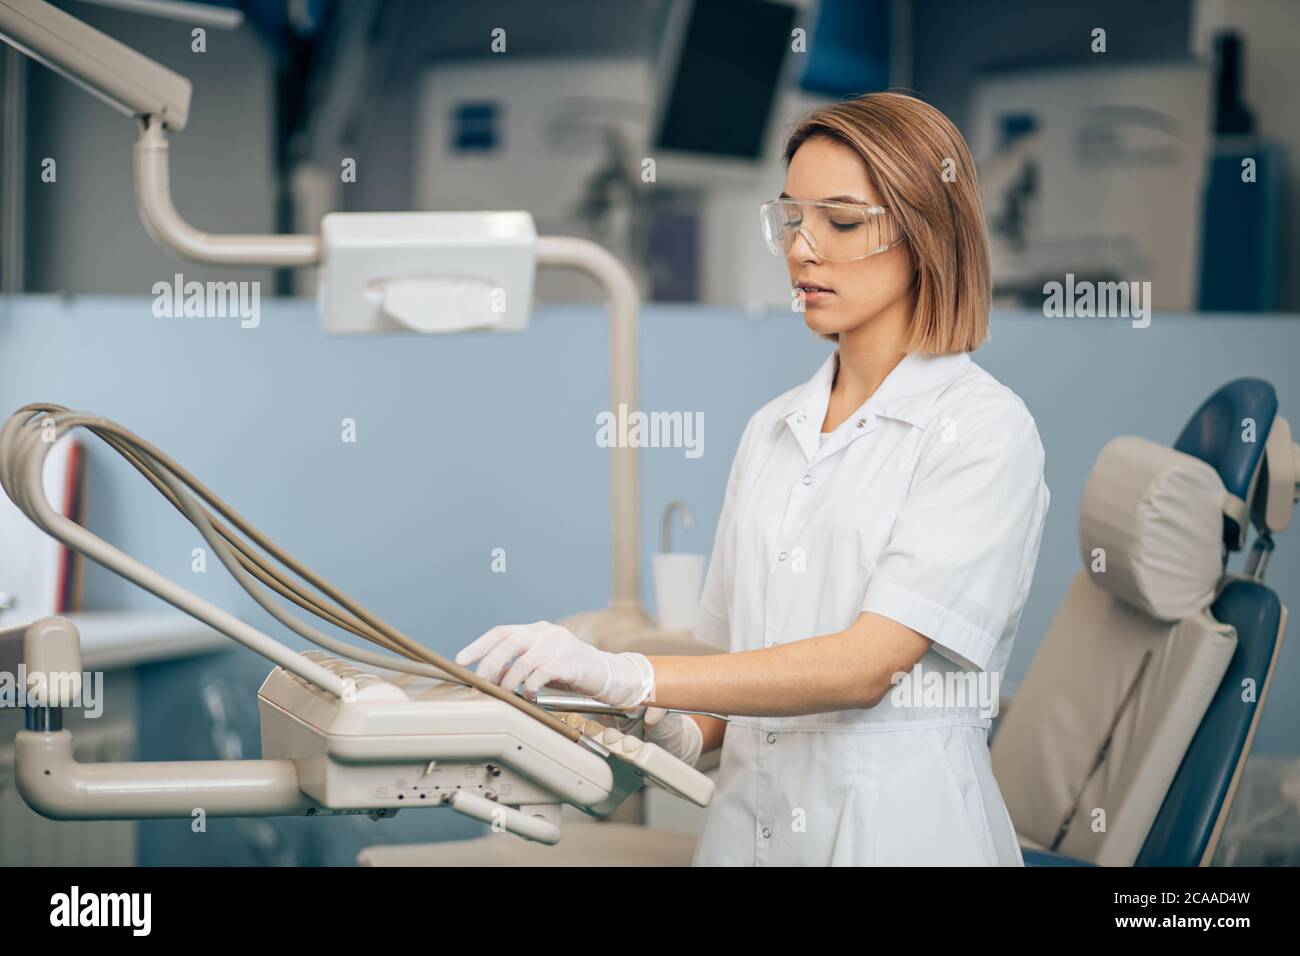 serious concentrated dentist woman at work, use special instrument equipment for teeth treatment, health care provider Stock Photo